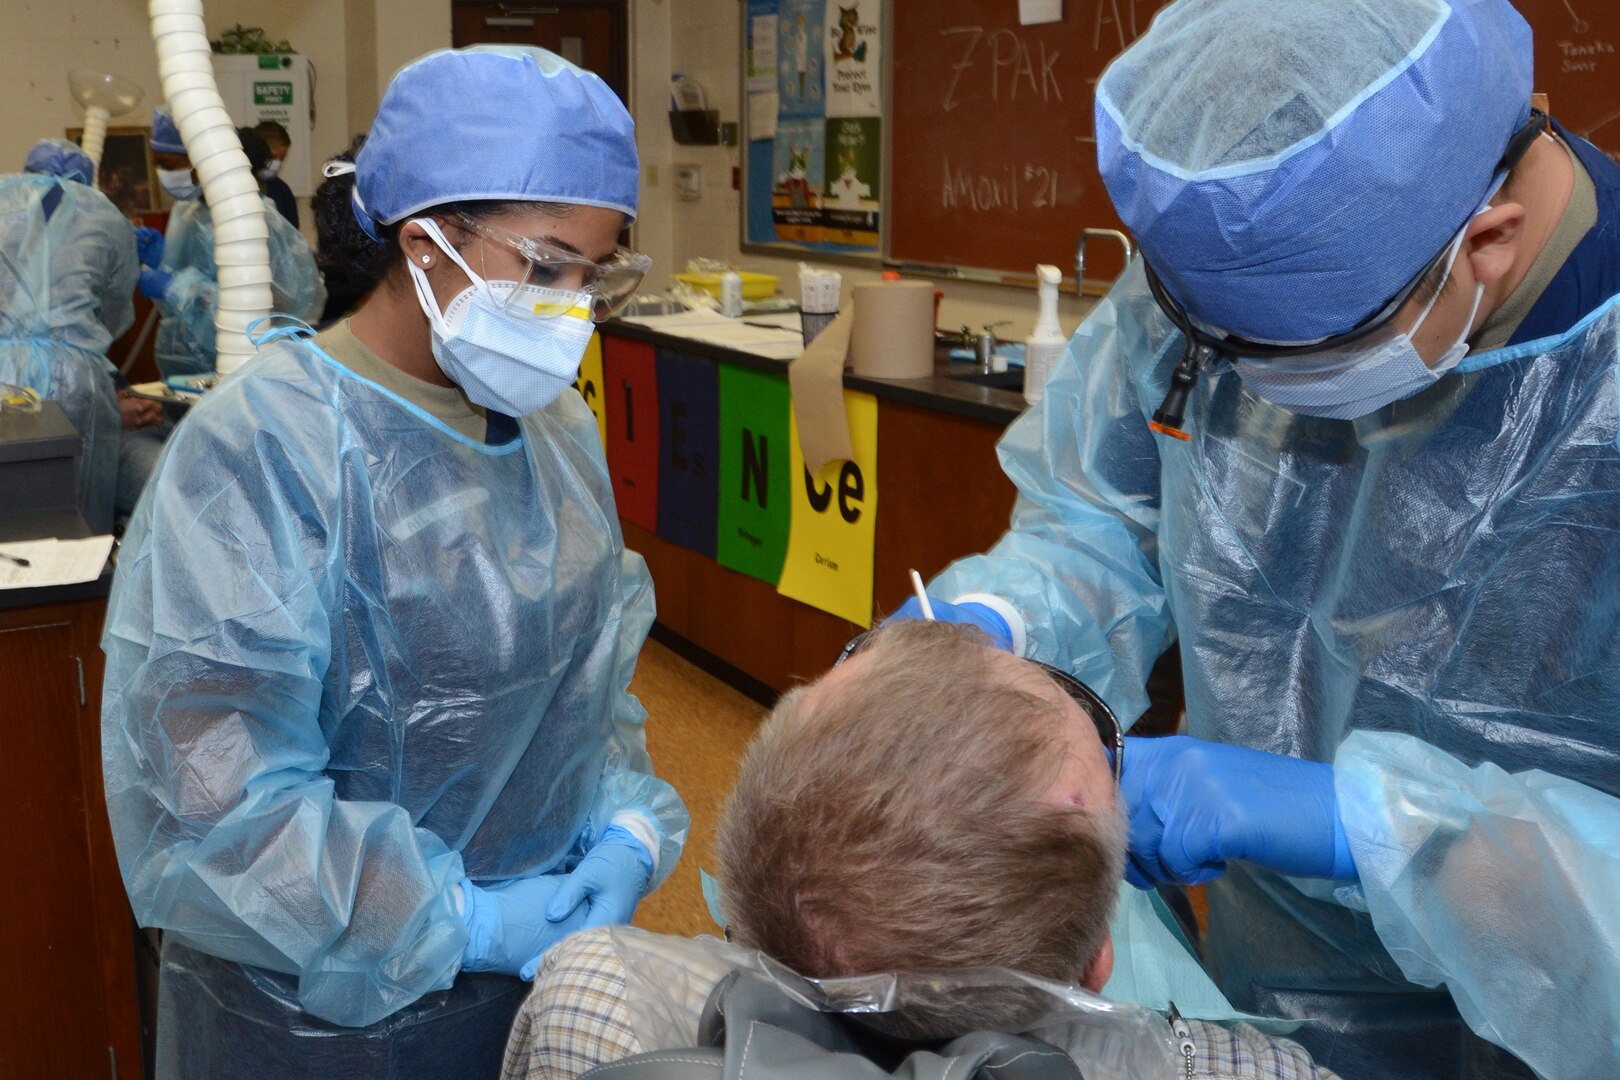 South Carolina Air National Guard Airman 1st Class Destiny Sims, left, 169th Fighter Wing, McEntire Joint National Guard Base, helps provide free dental care in Metropolis, Illinois, June 16, 2021. Operation Healthy Delta is a Department of Defense Innovative Readiness Training program that provides key services in underserved communities while offering training for military personnel.